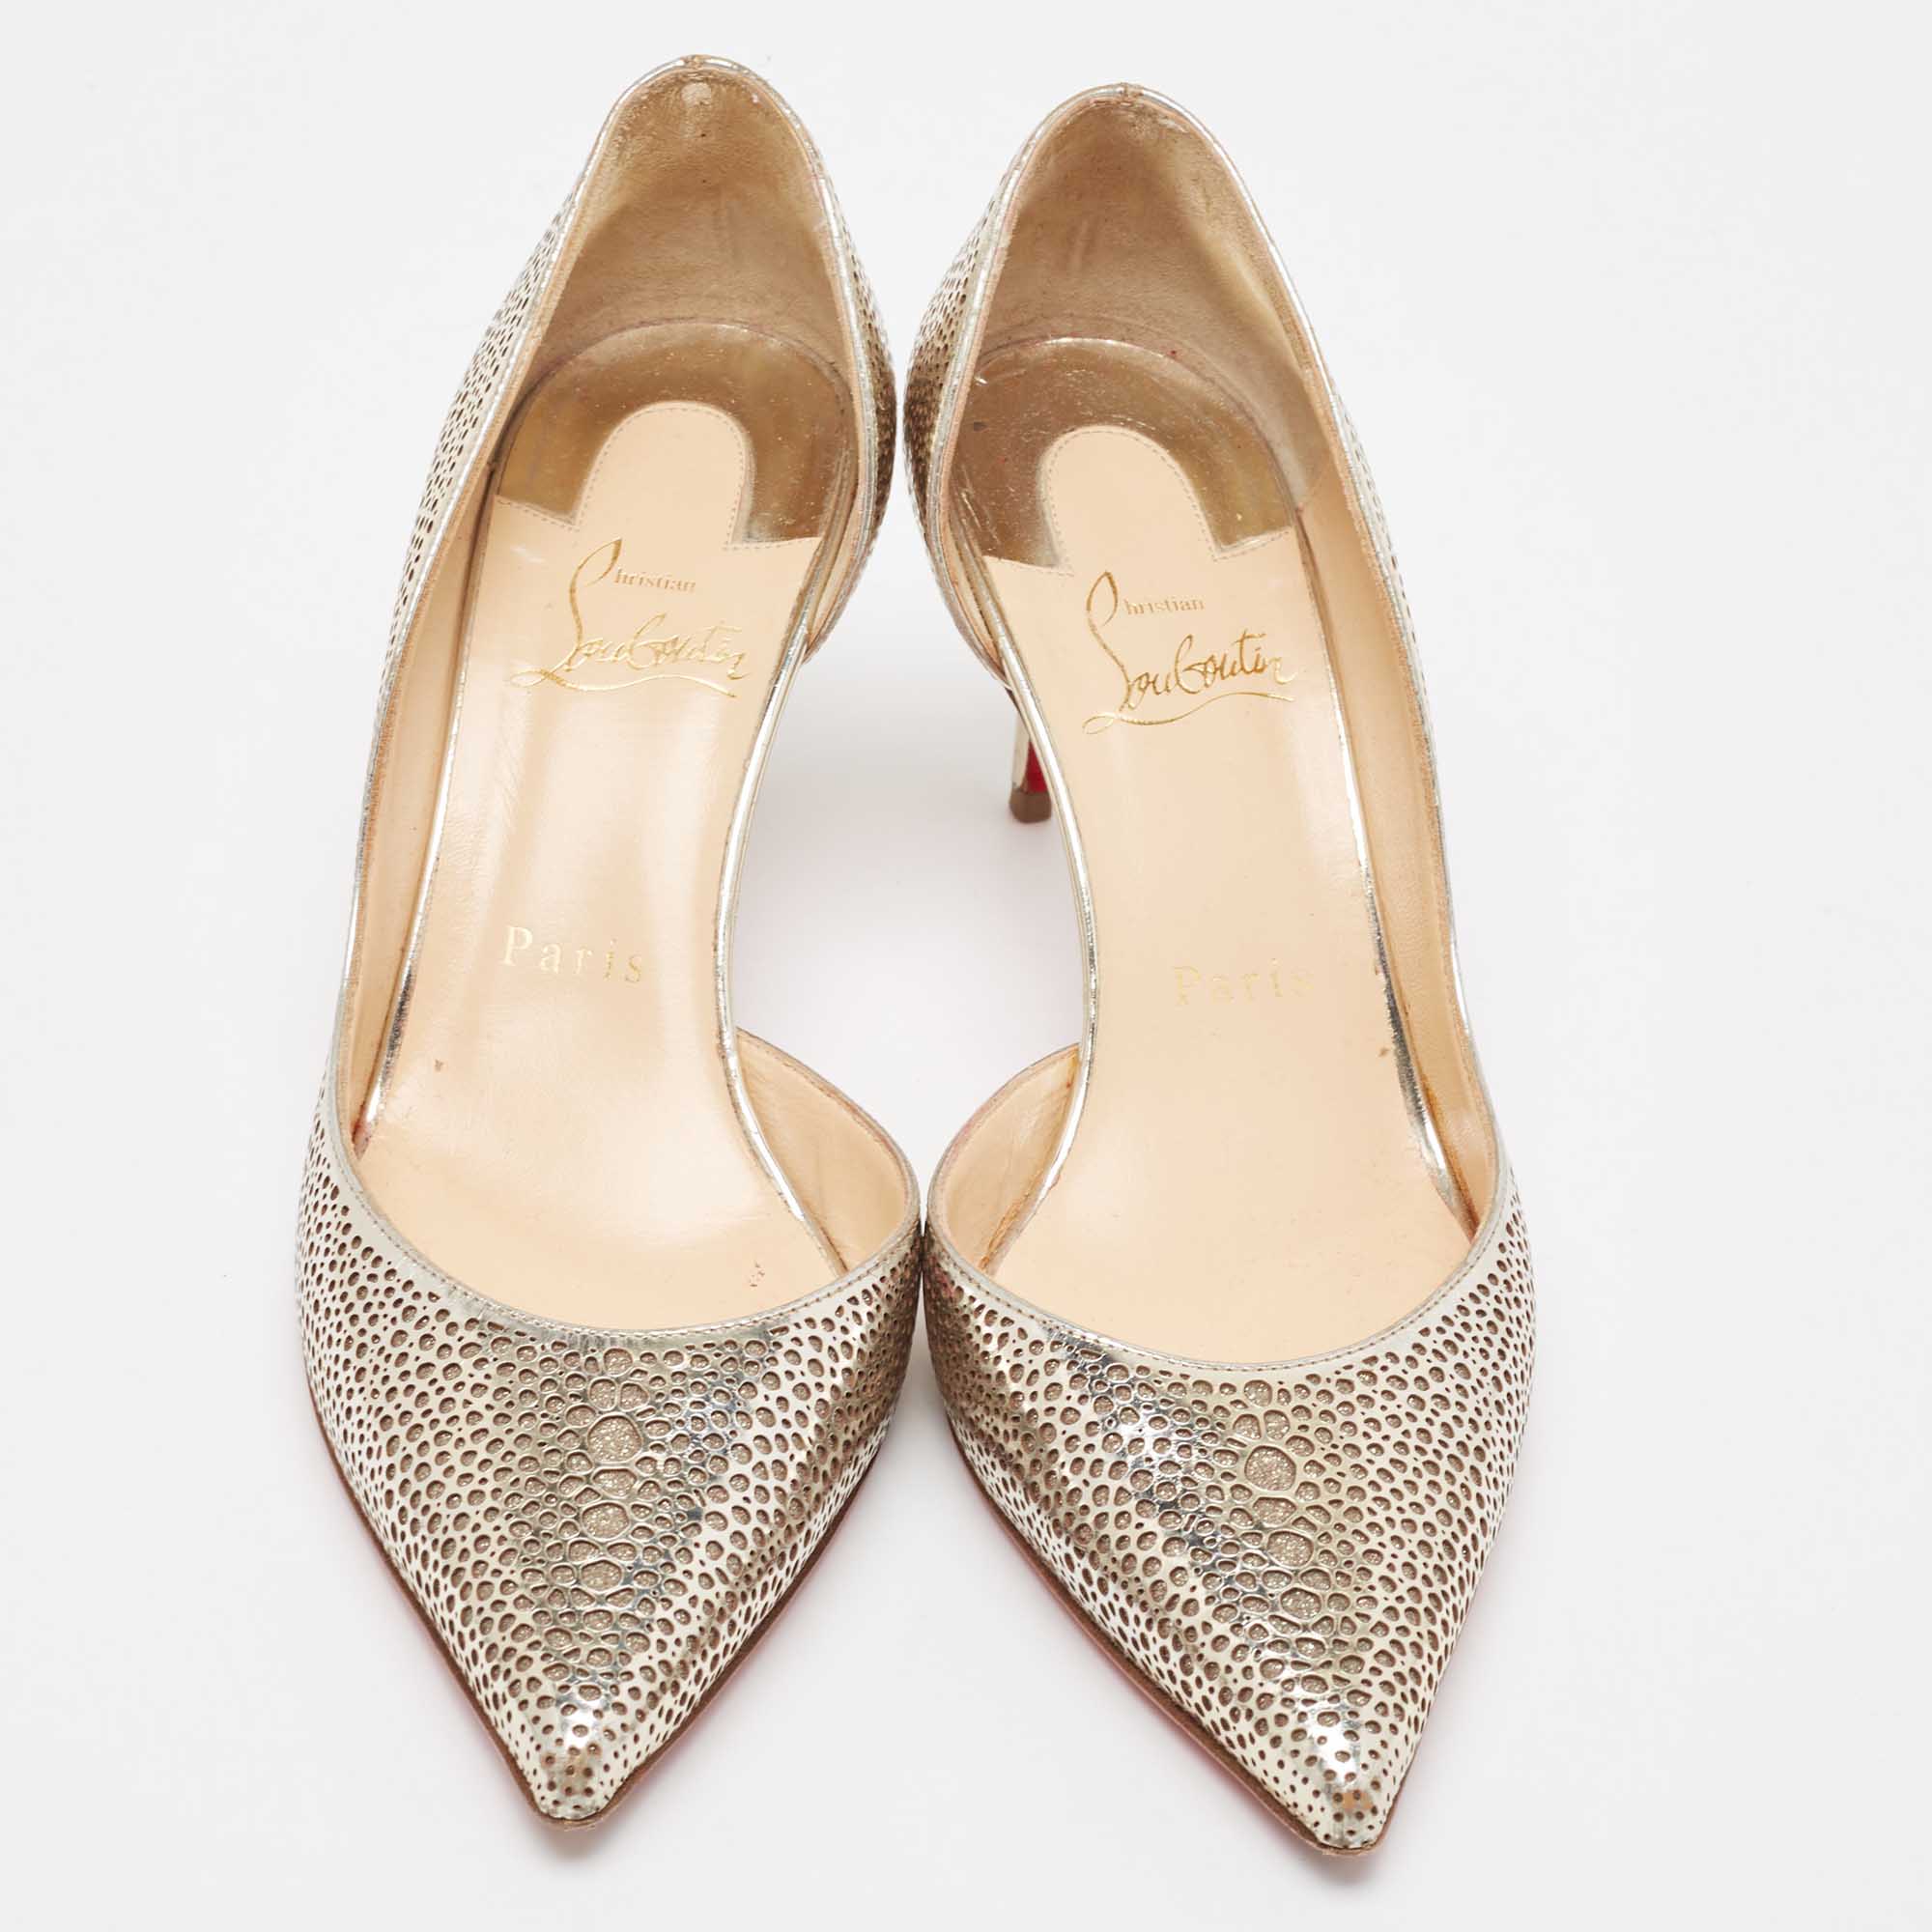 Christian Louboutin Gold Laser Cut Leather And Glitter Galu D'orsay Pumps Size 36